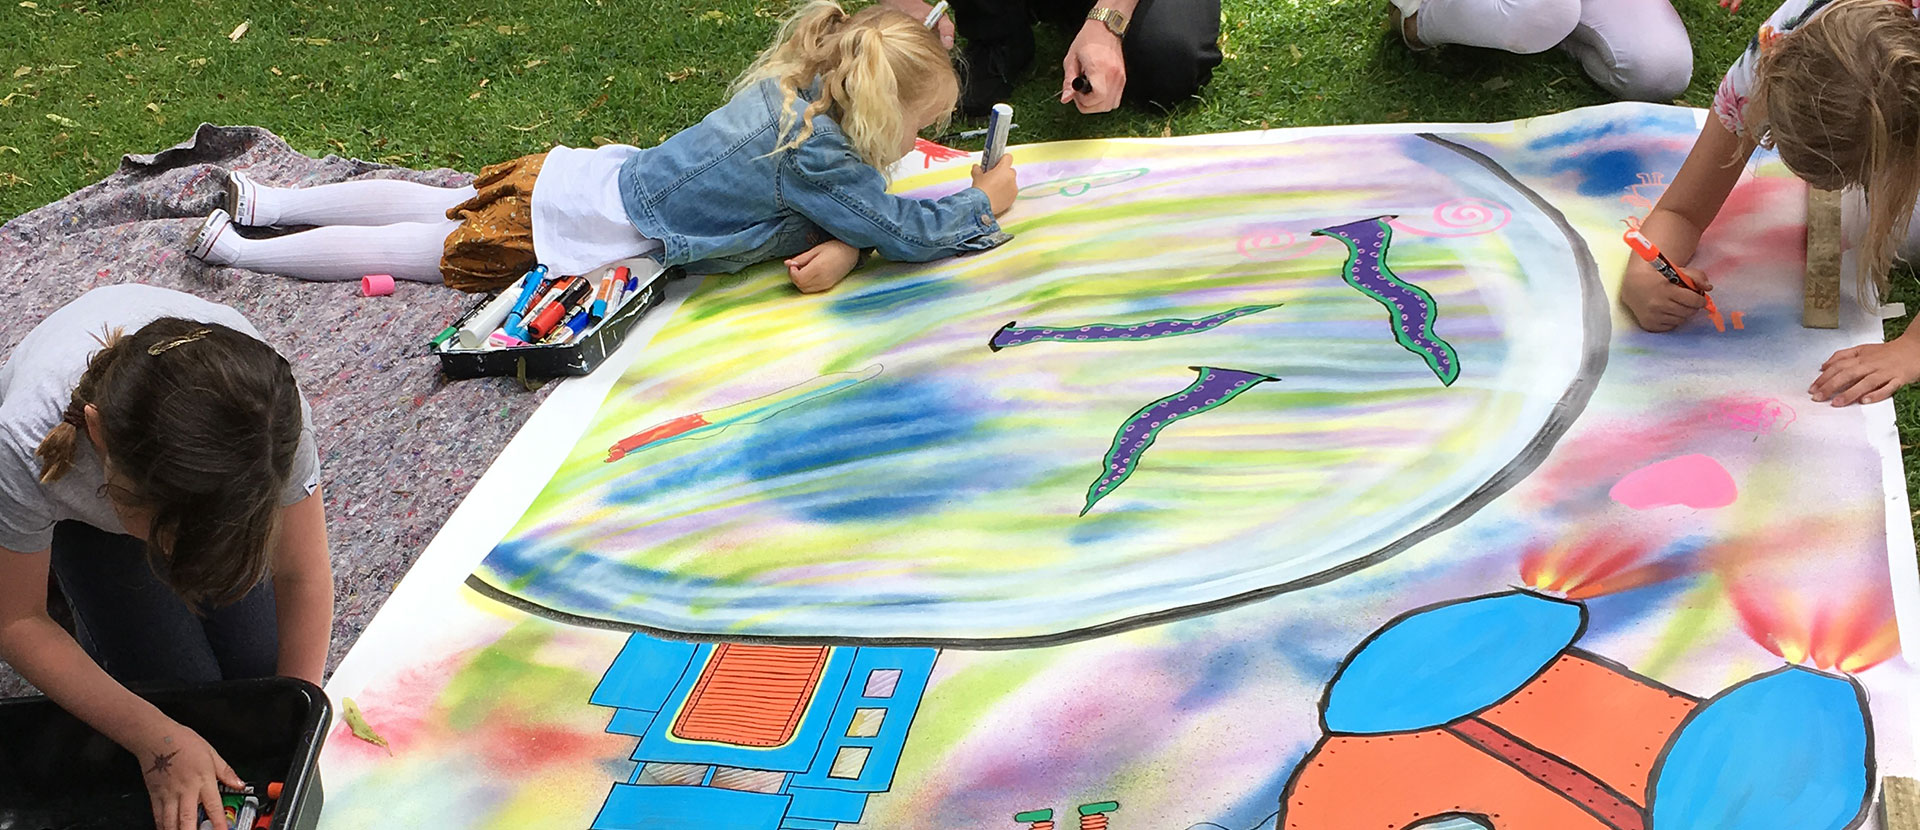 Children painting on the ground